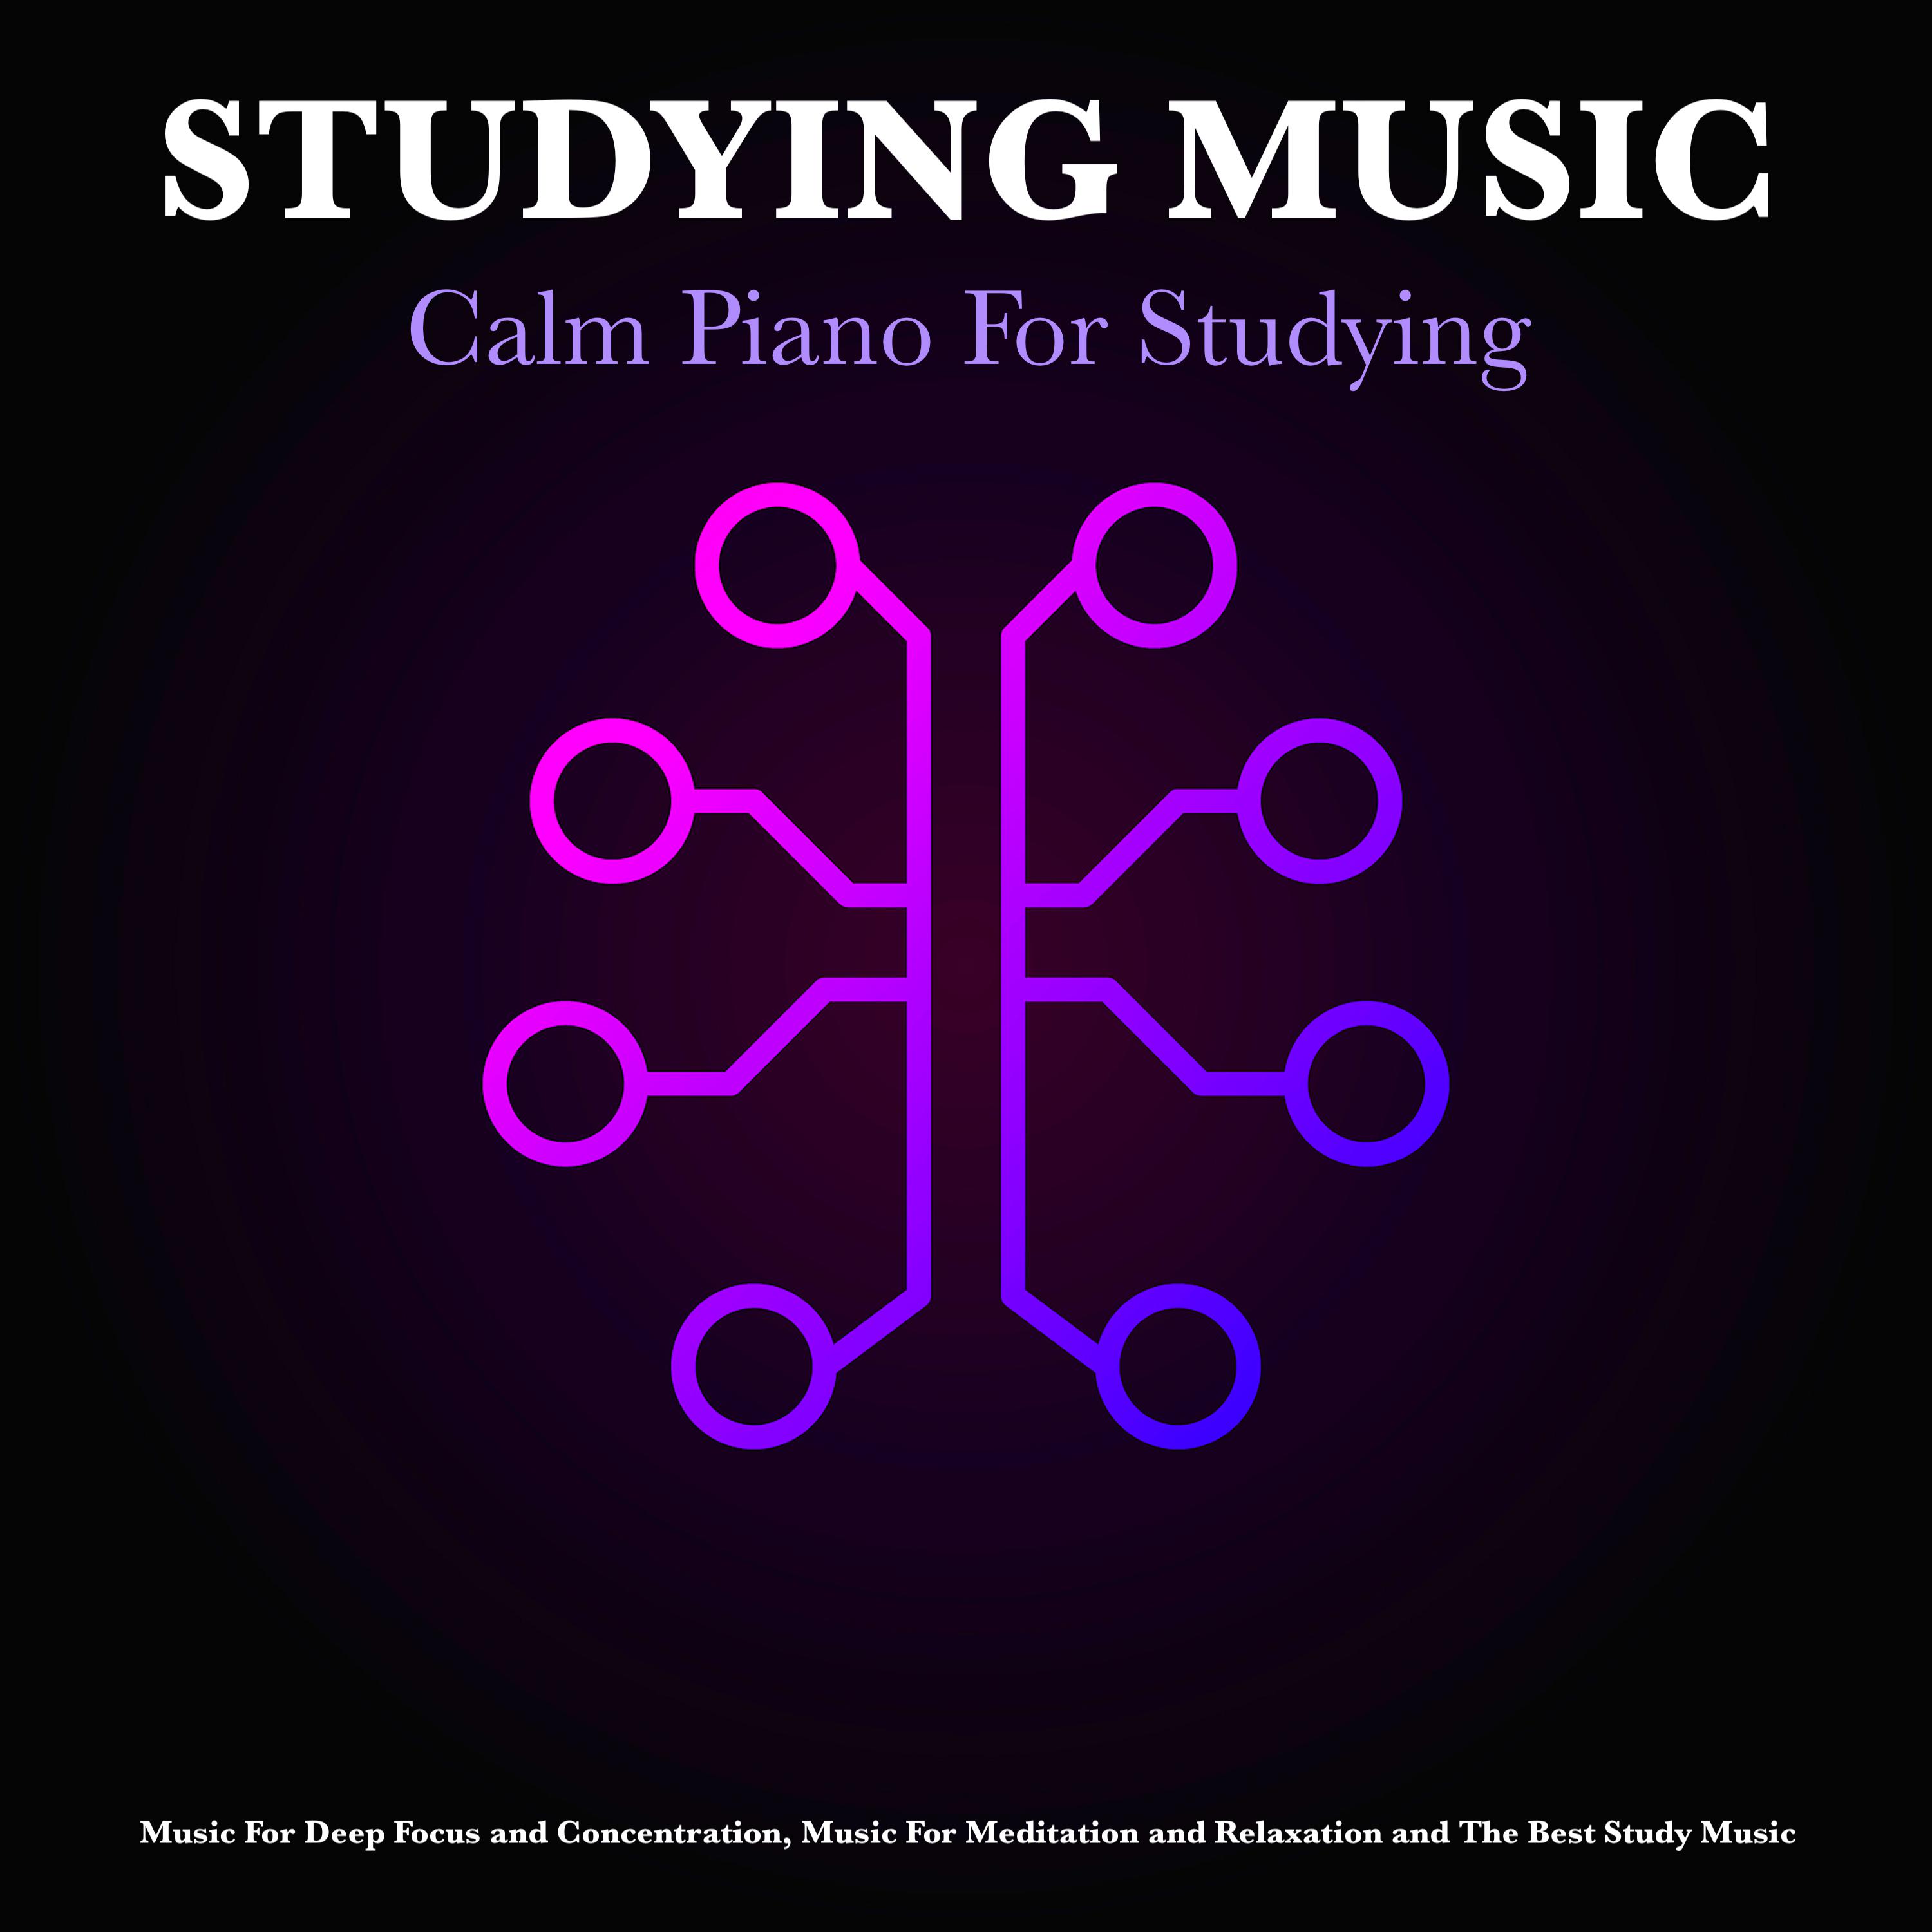 Peaceful Piano For Studying